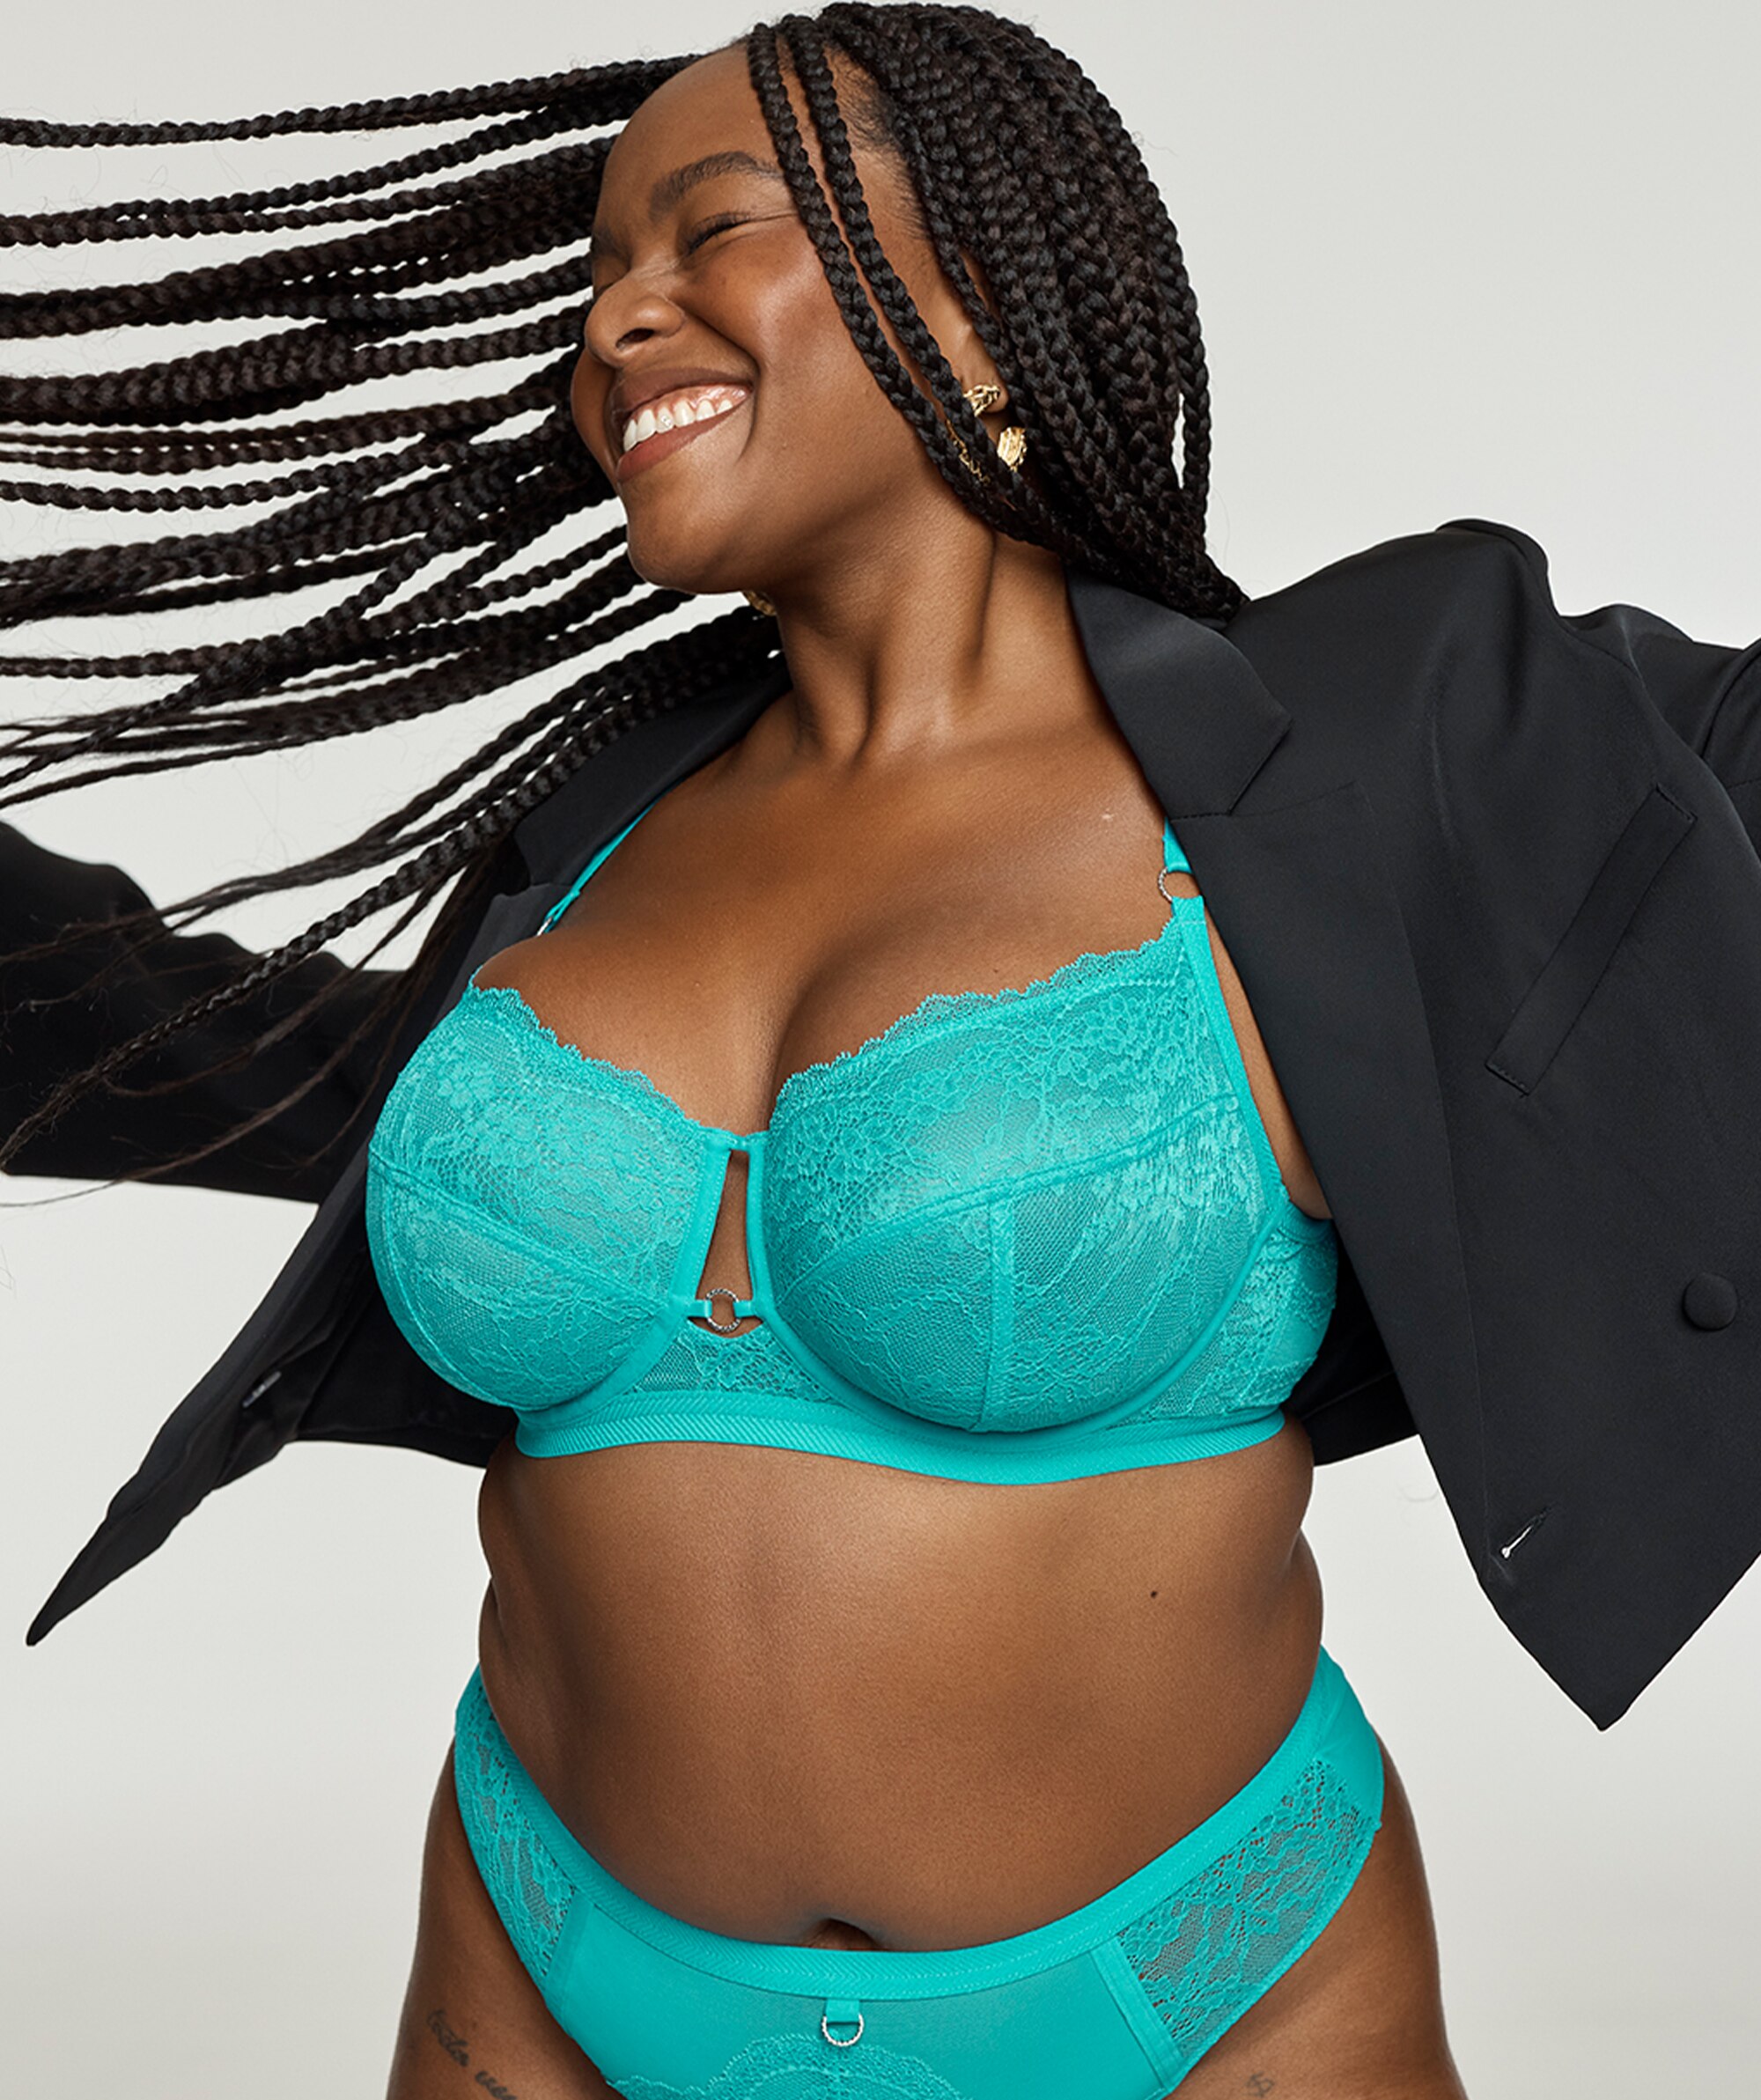 Millie Full Cup Underwire Bra - Teal